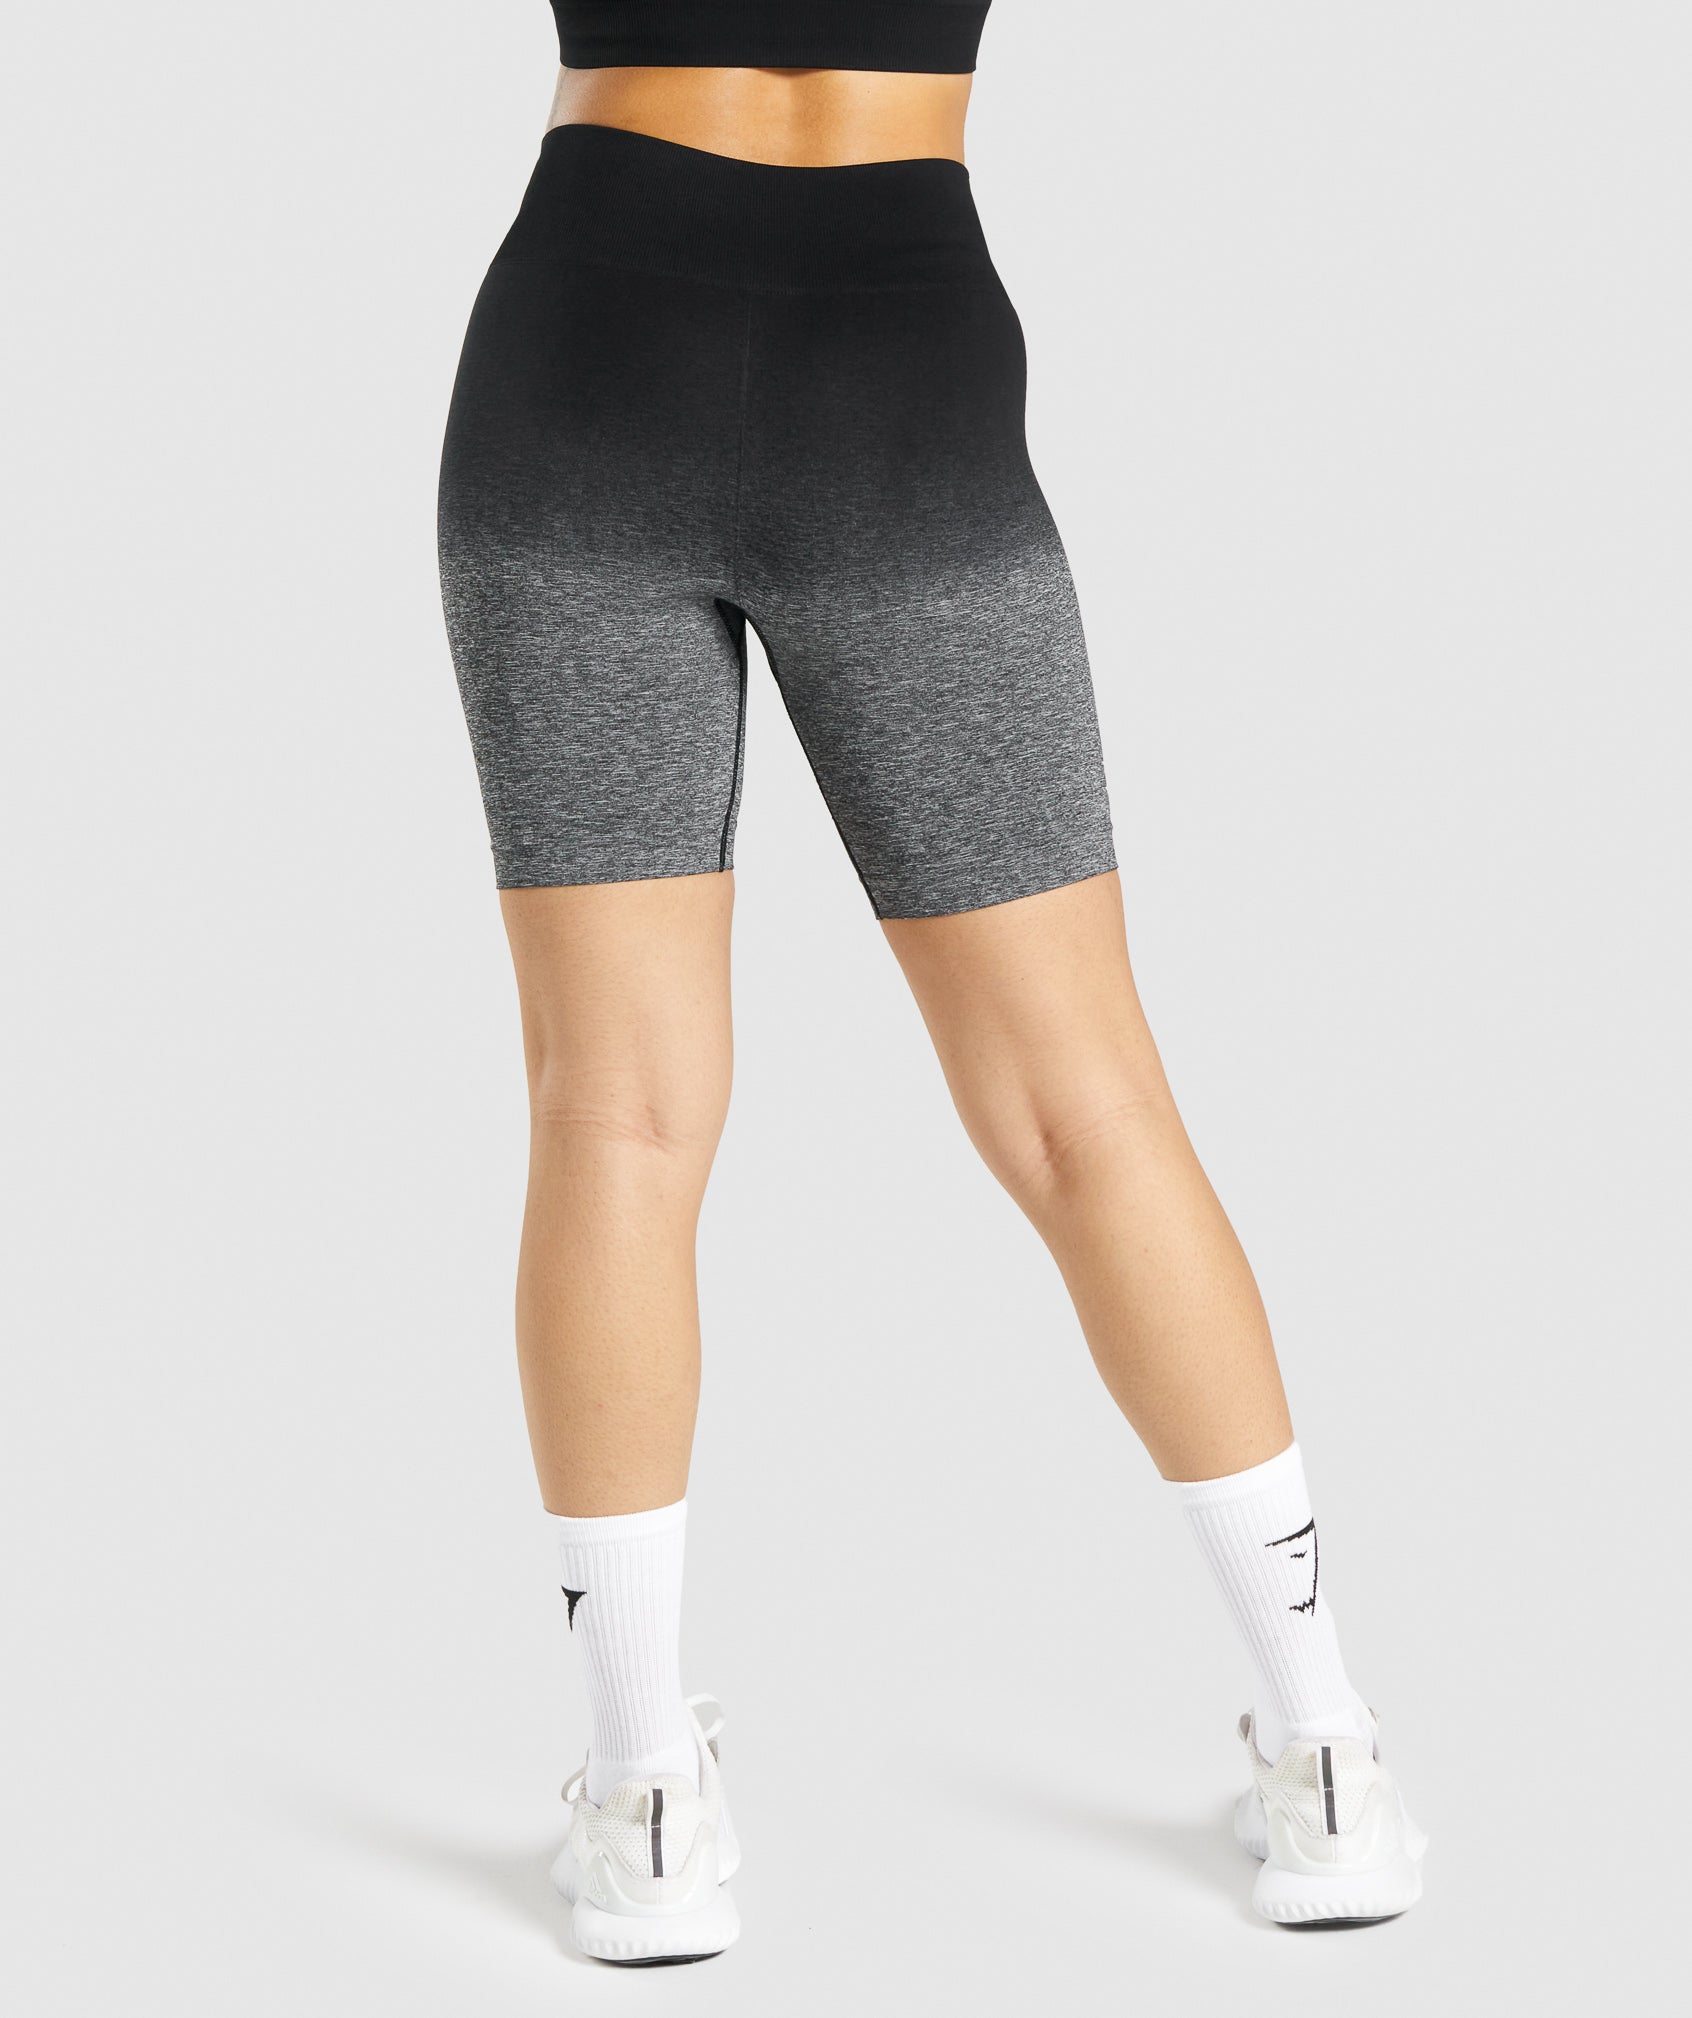 Adapt Ombre Seamless Shorts in Black/Black Marl - view 2